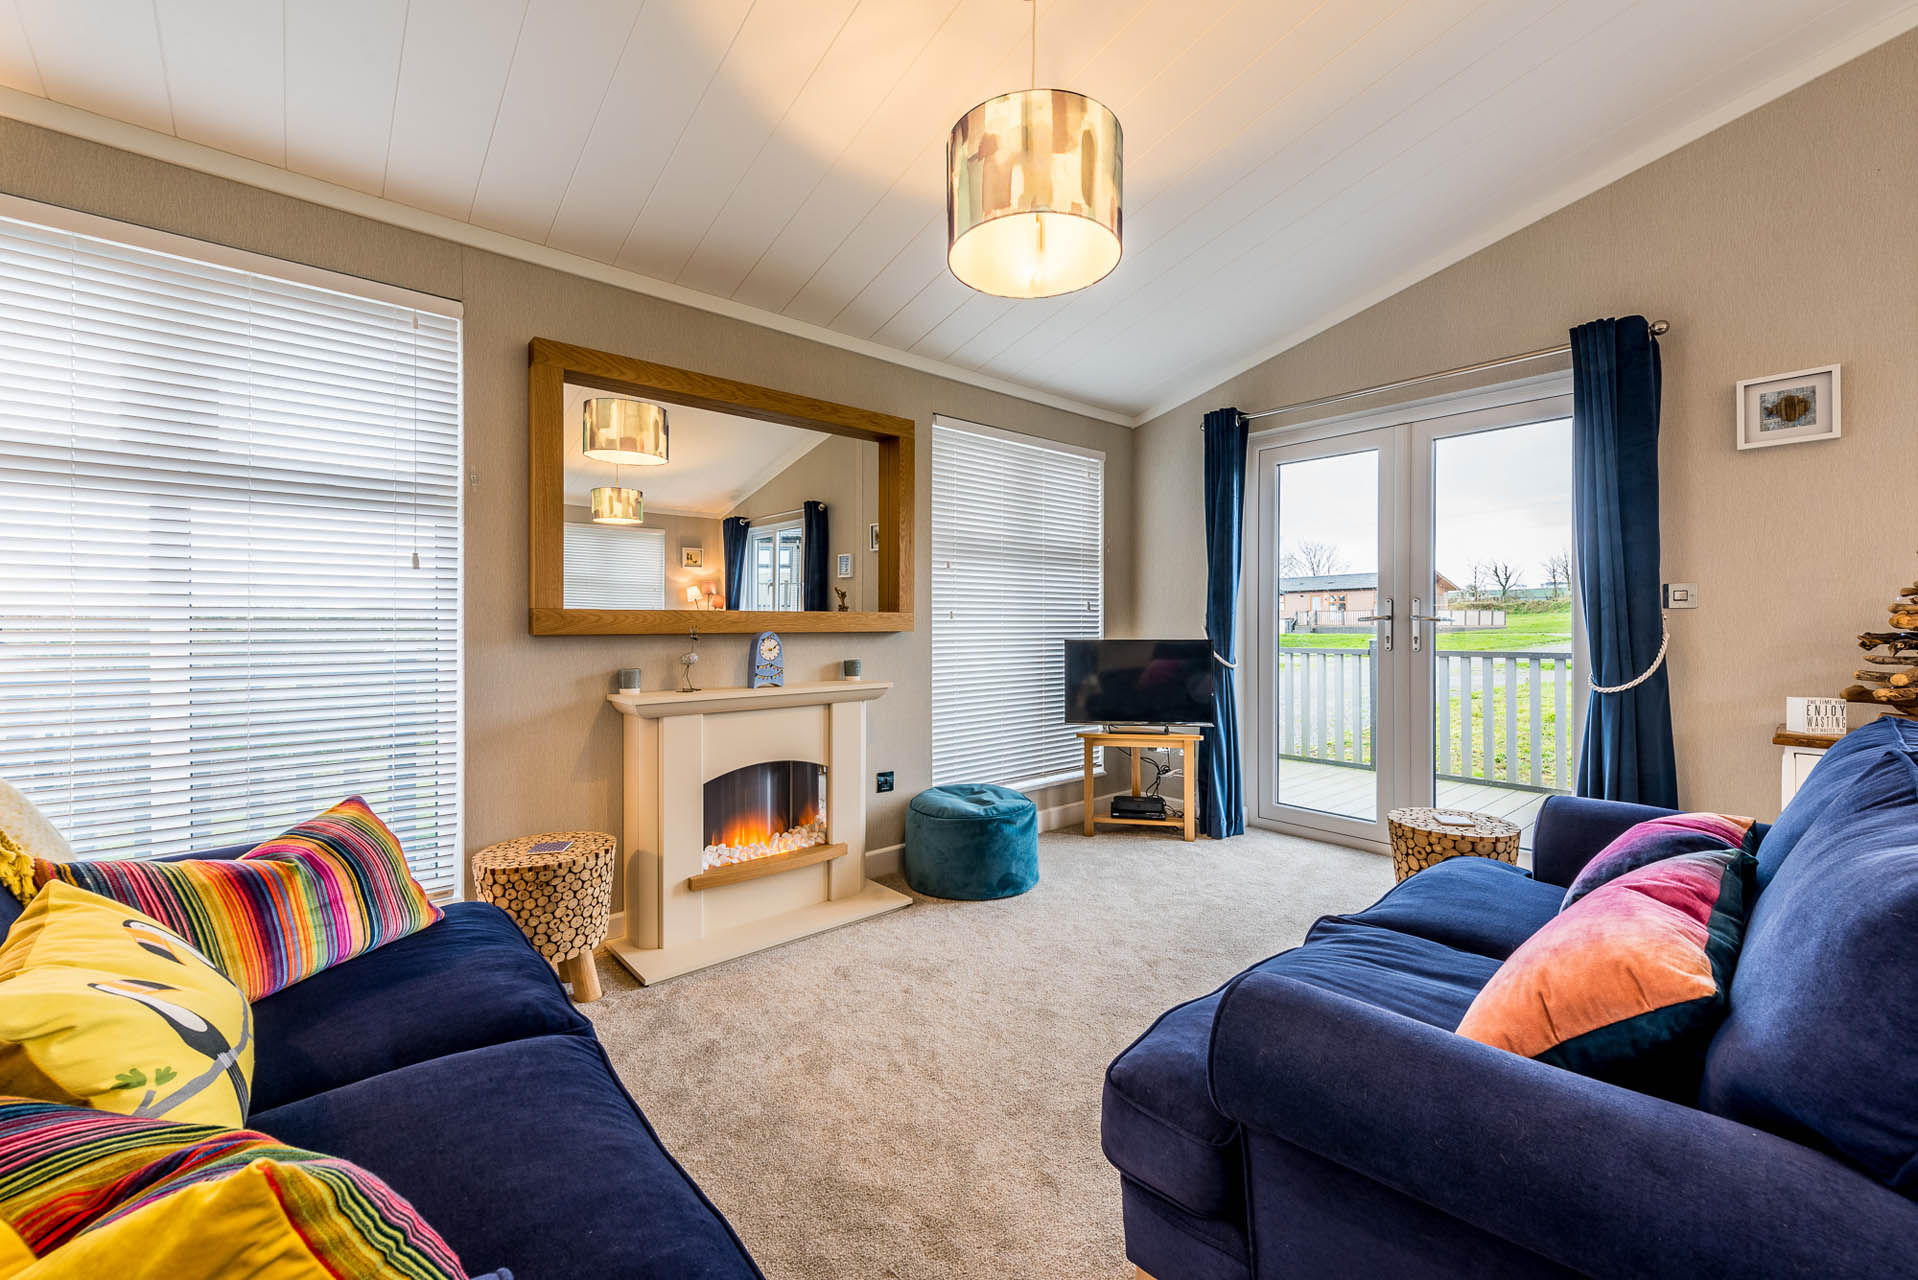 The Nug Lodge at St. Tinney Farm Holidays in Cornwall